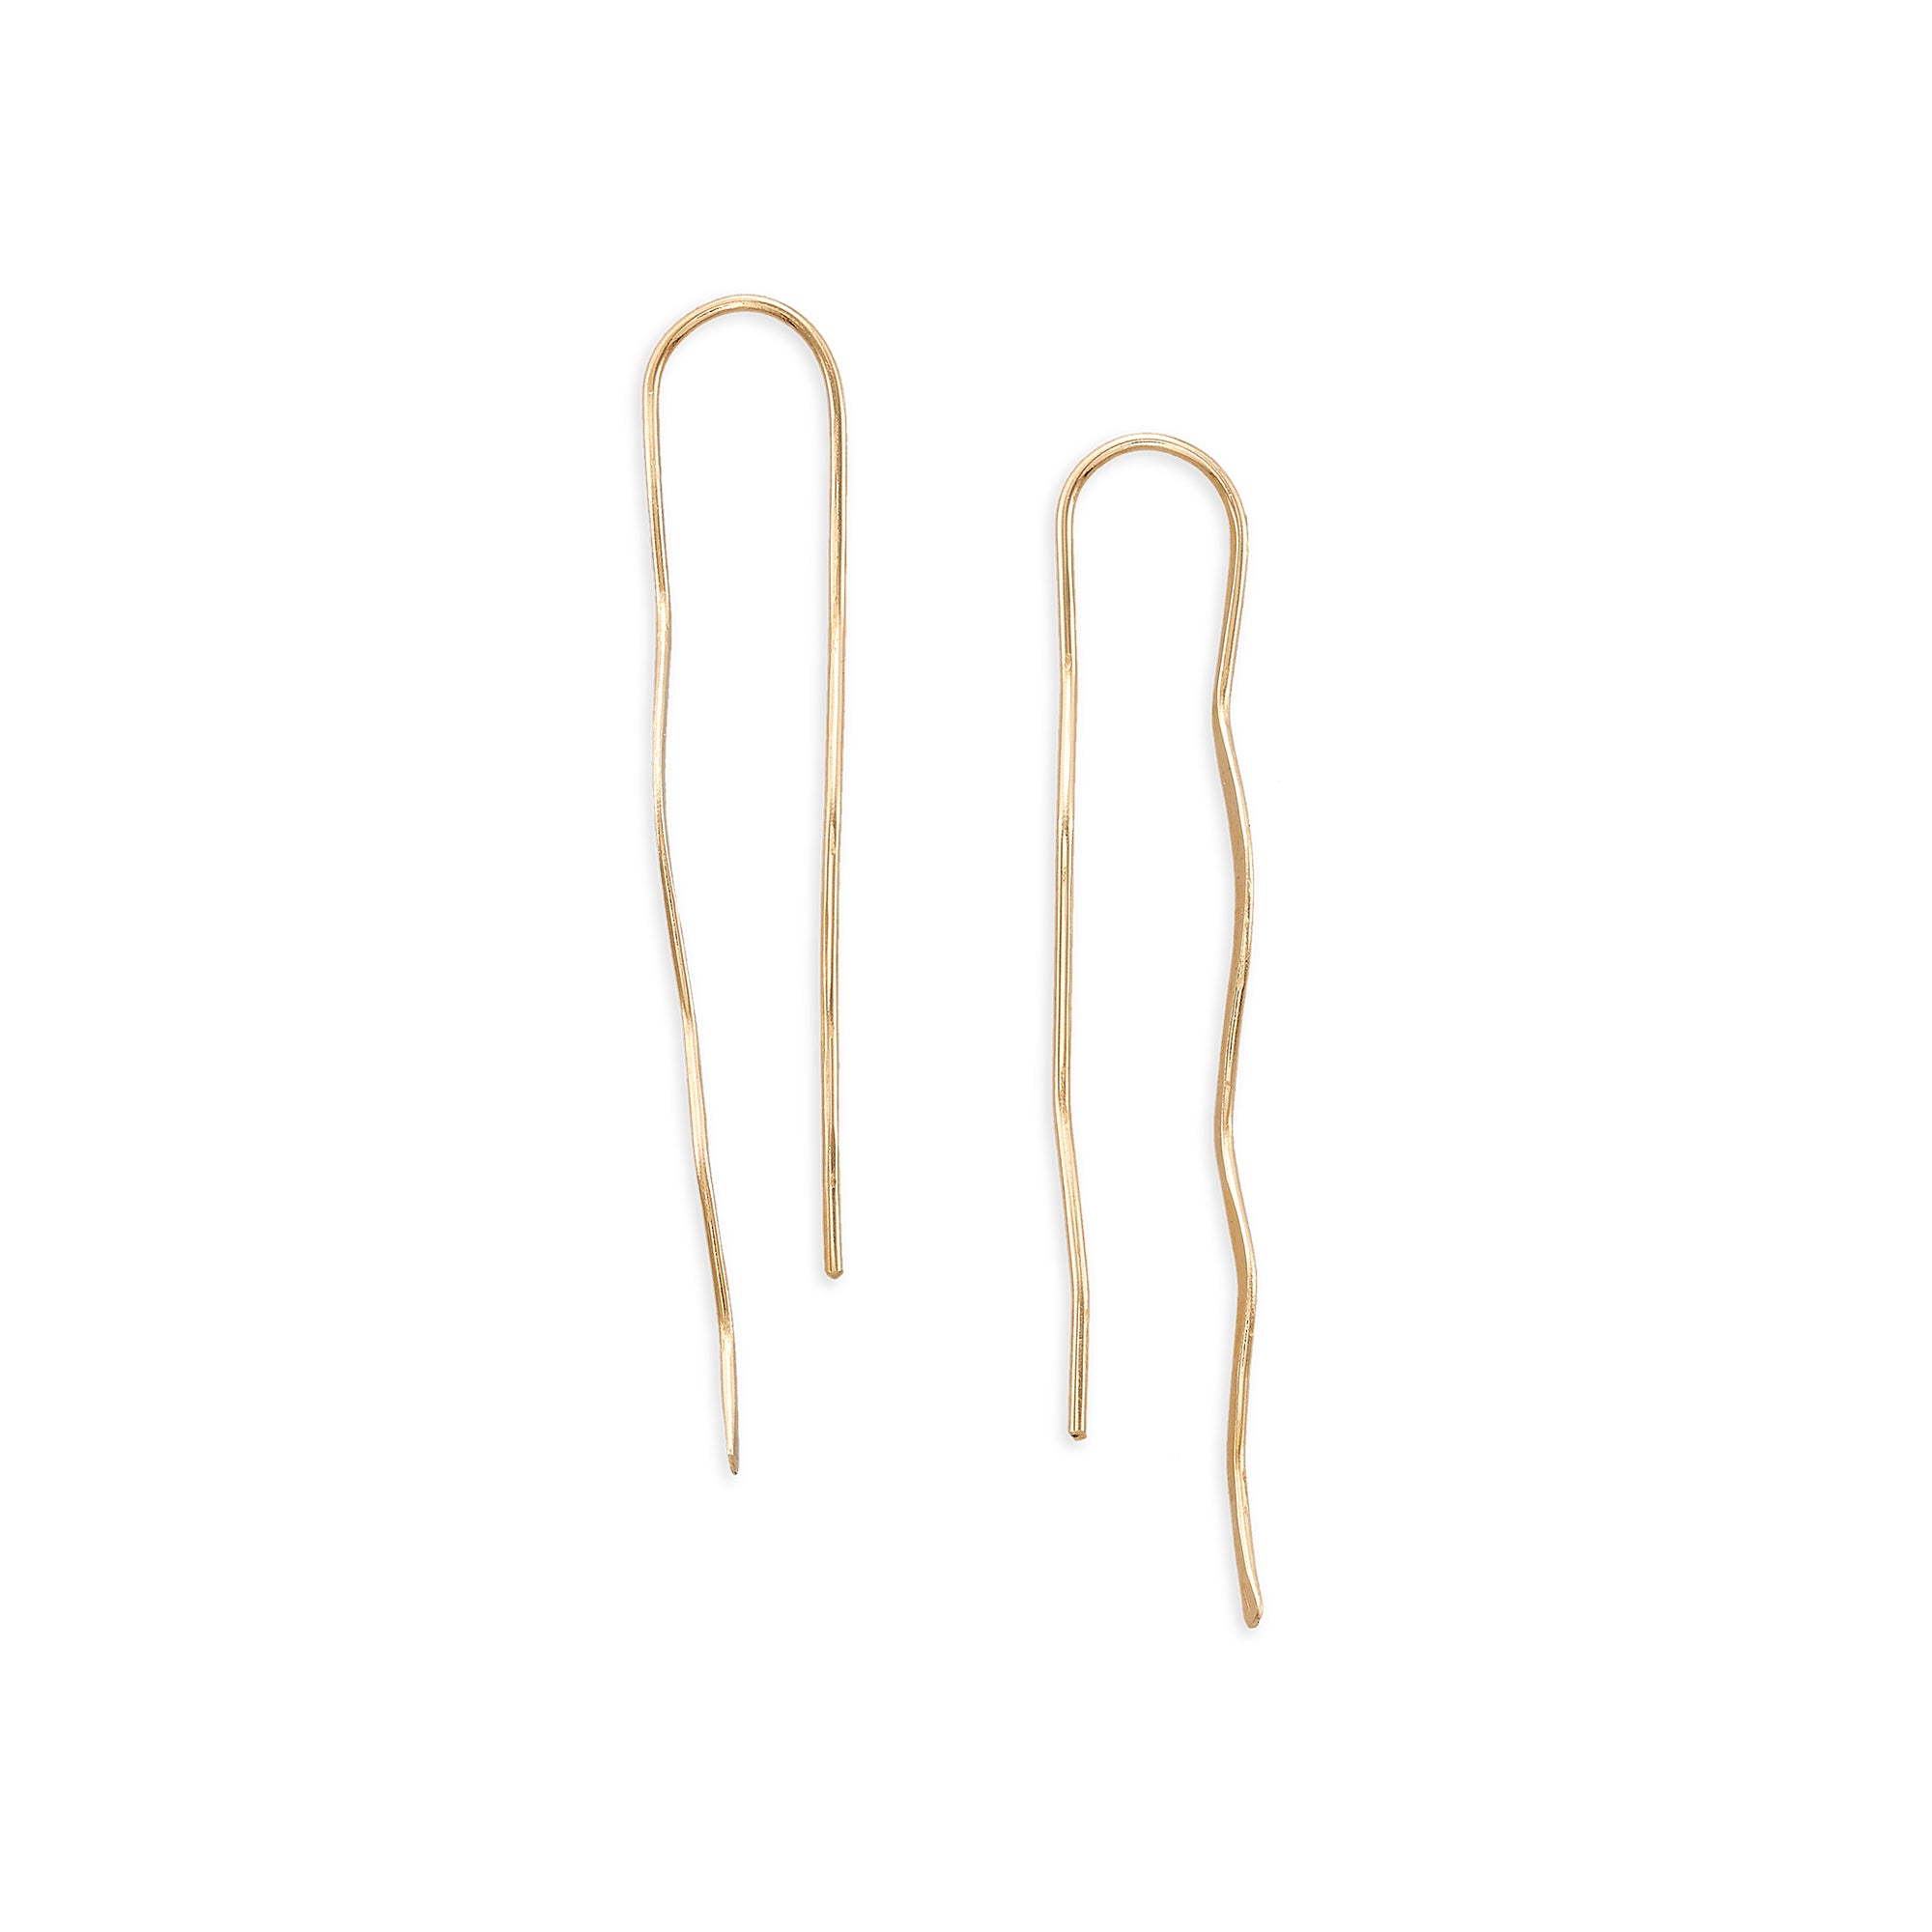 Buttress Hook from our Callen Thompson collab, these lightweight earrings are hand-formed and hammered from 14k gold wire.